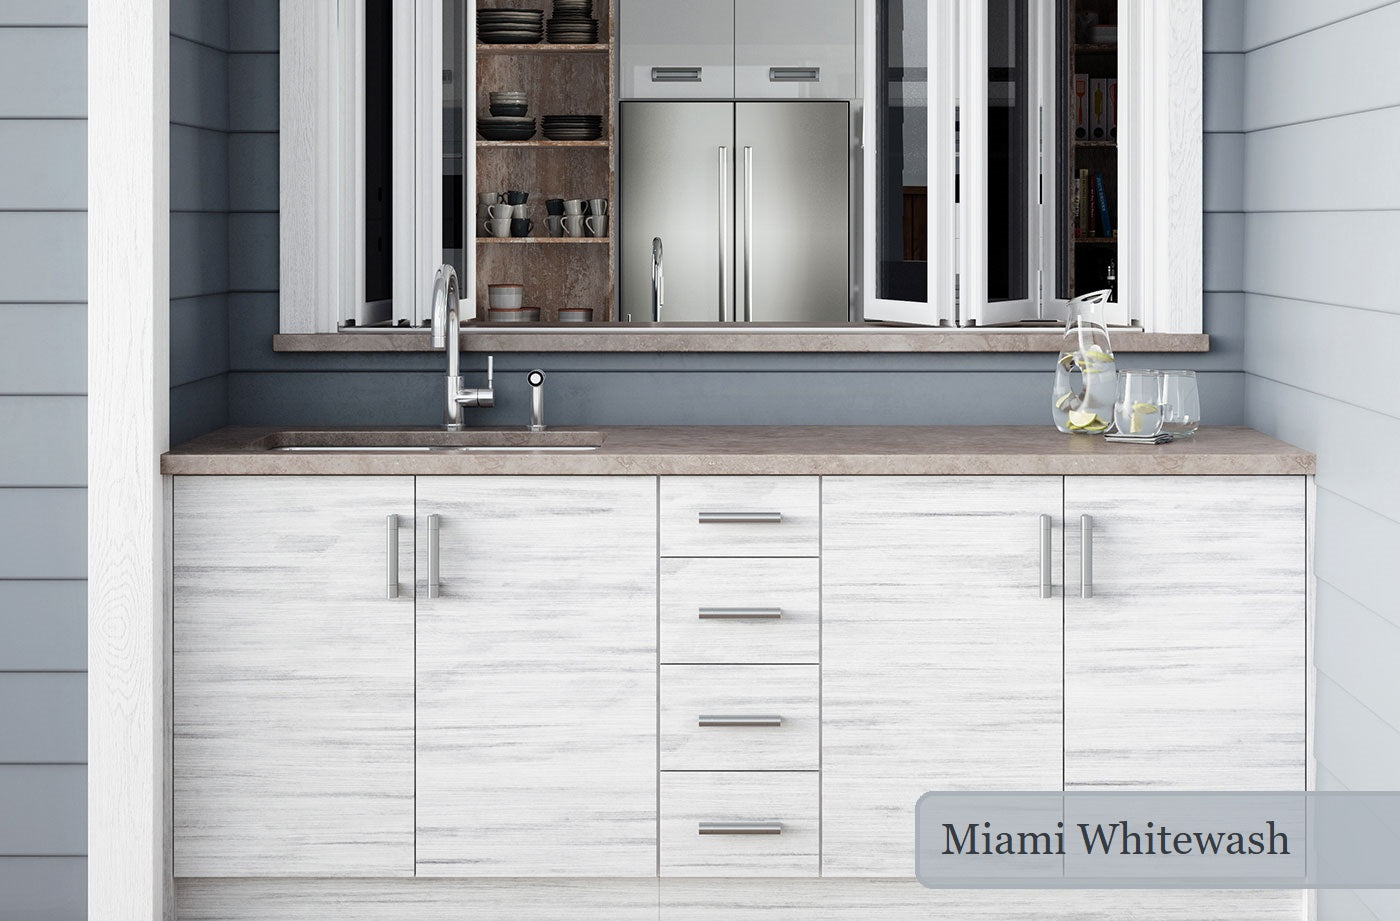 Outdoor Cabinets at DirectCabinets.com. WeatherStrong Miami Whitewash. White Wood grain outdoor cabinetry.